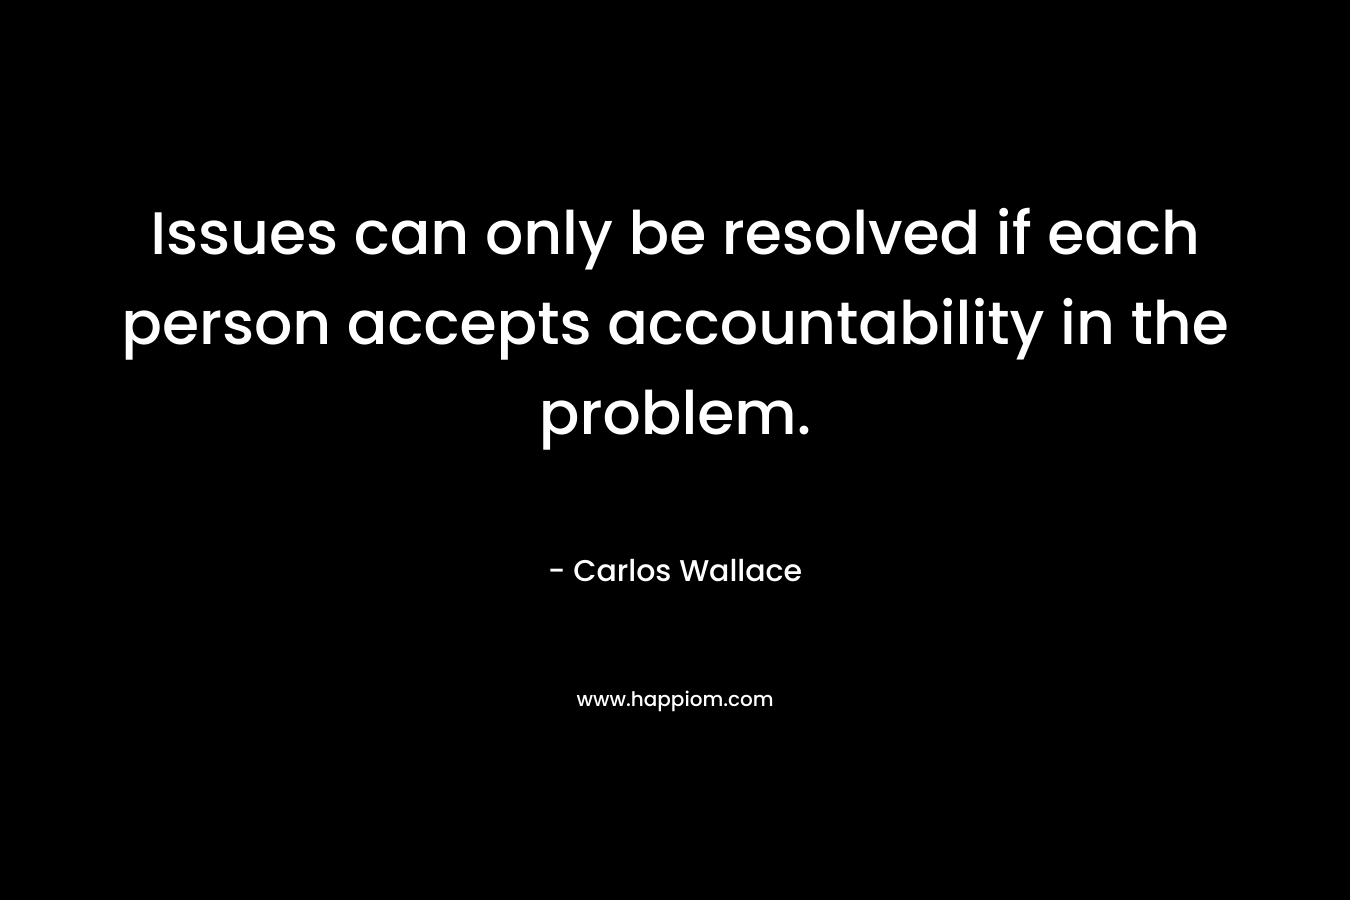 Issues can only be resolved if each person accepts accountability in the problem. – Carlos Wallace